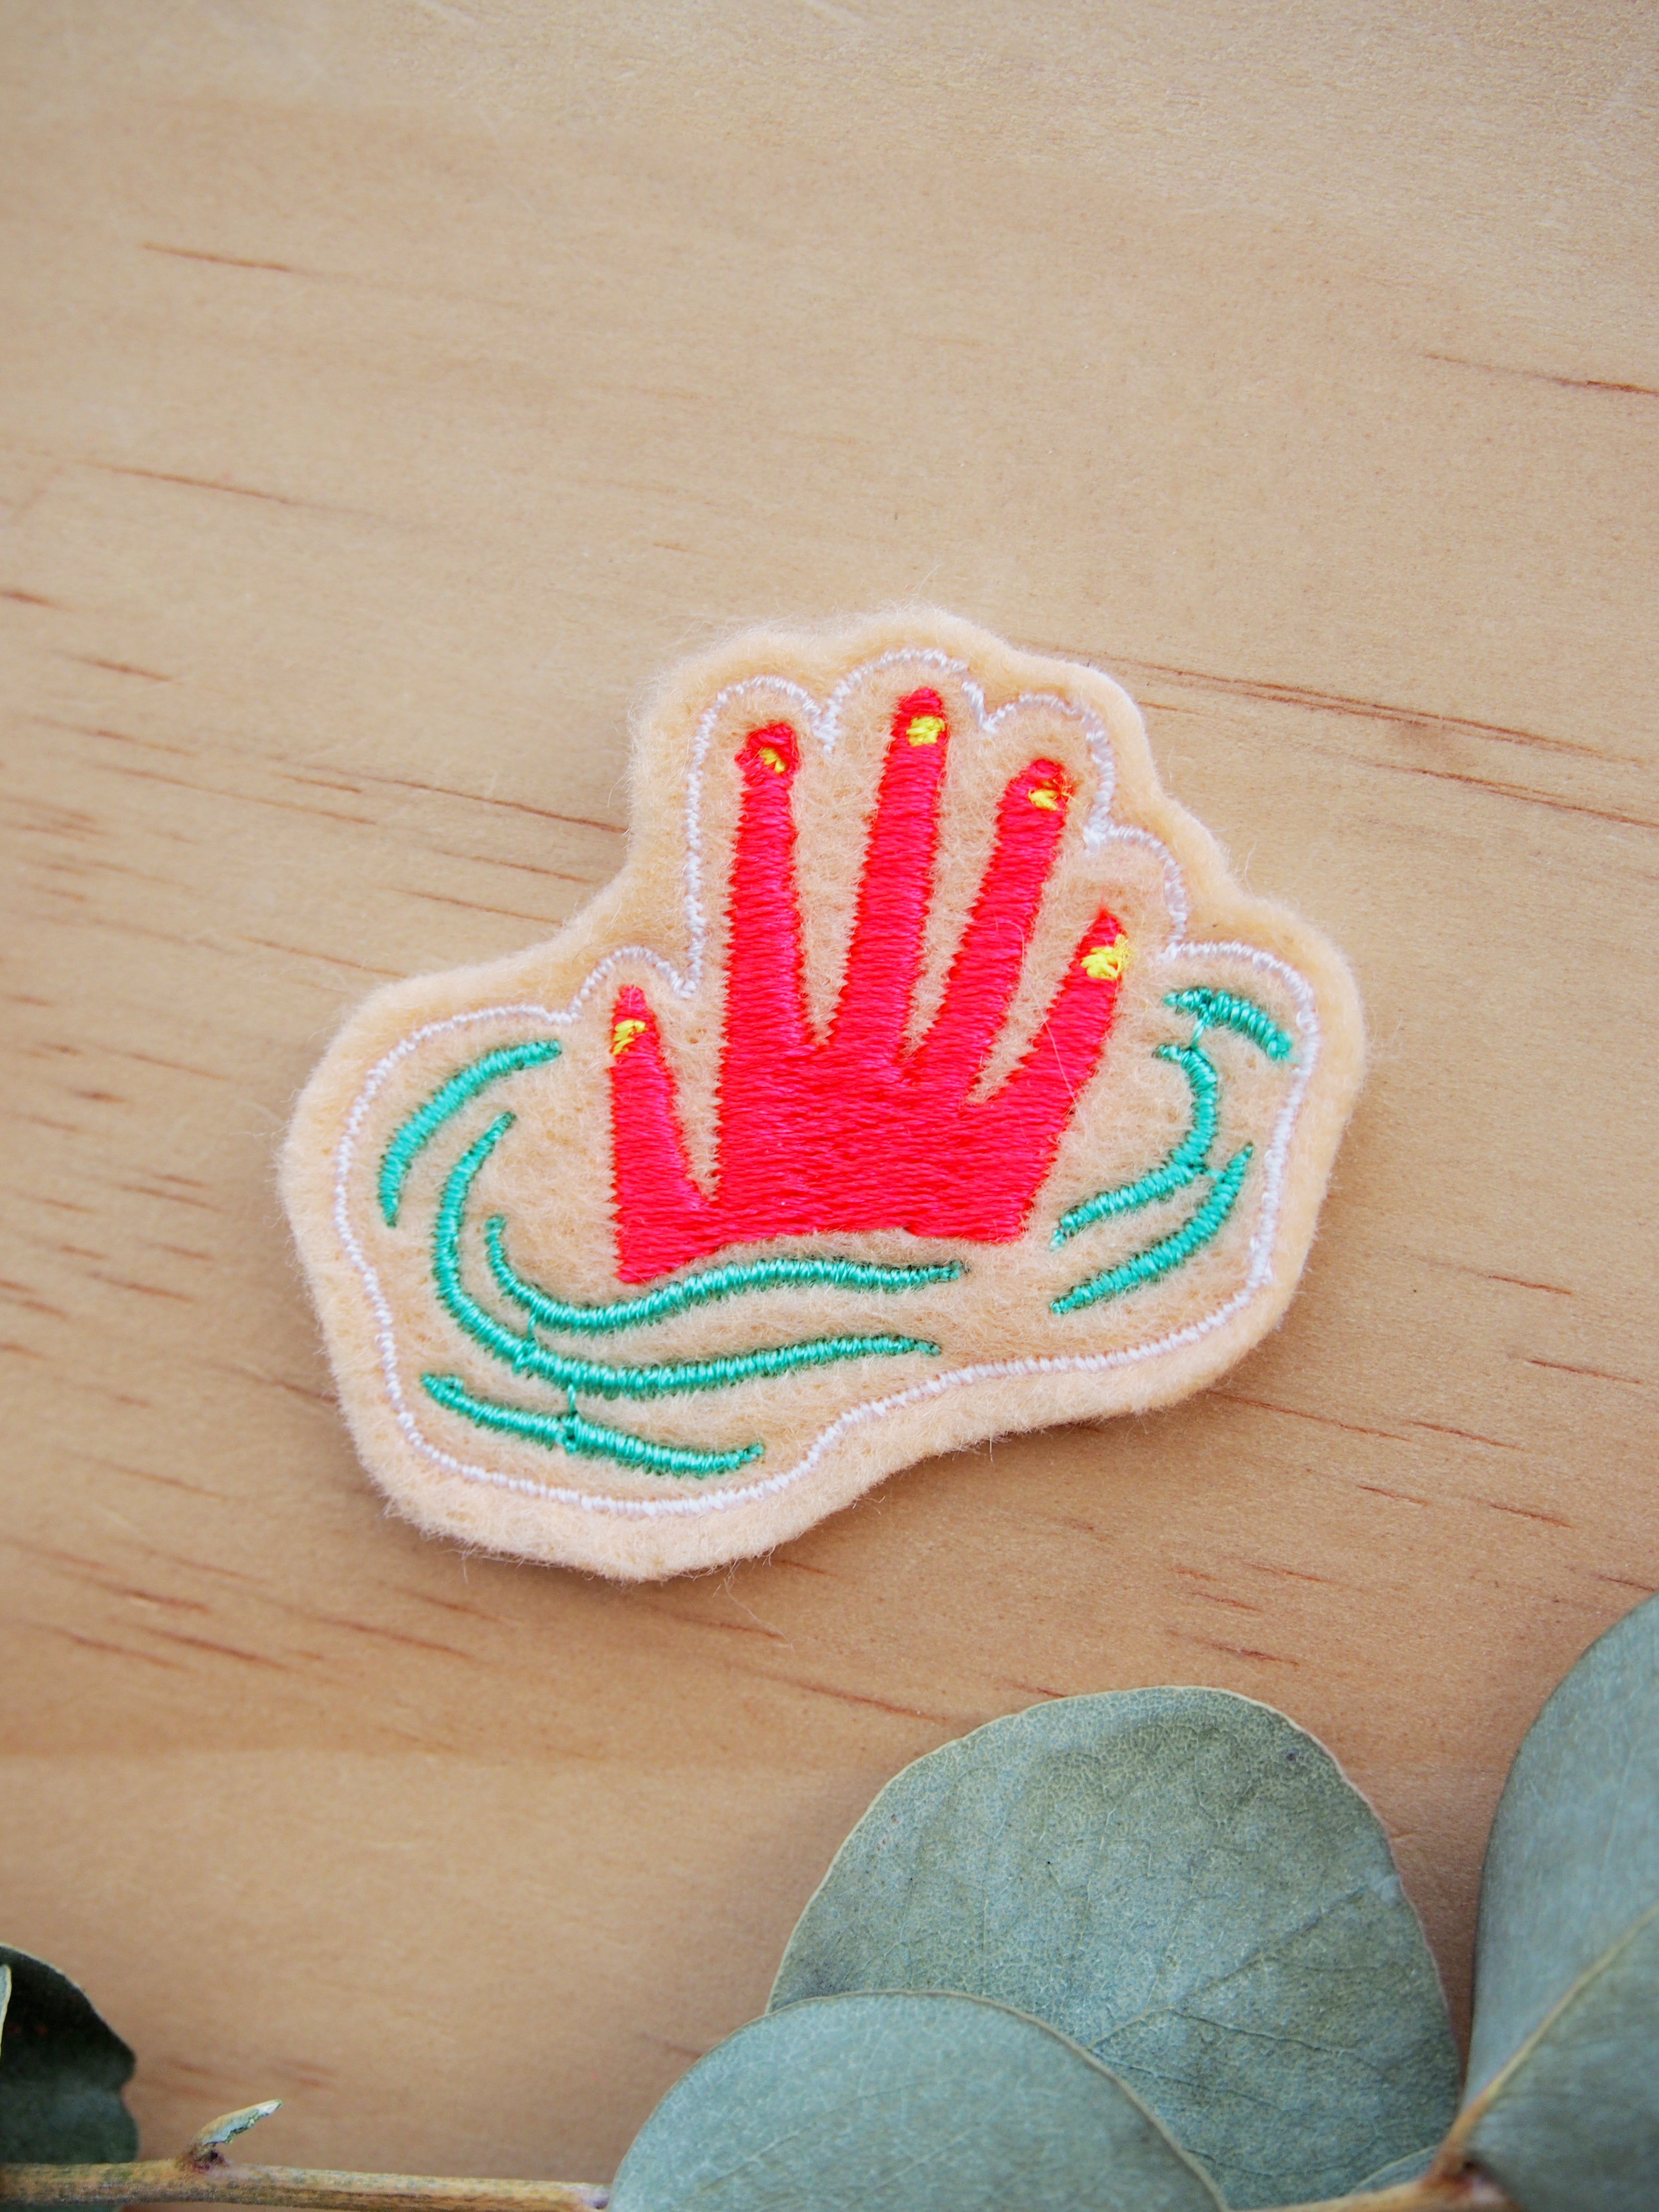 Neon Swimmers Patches